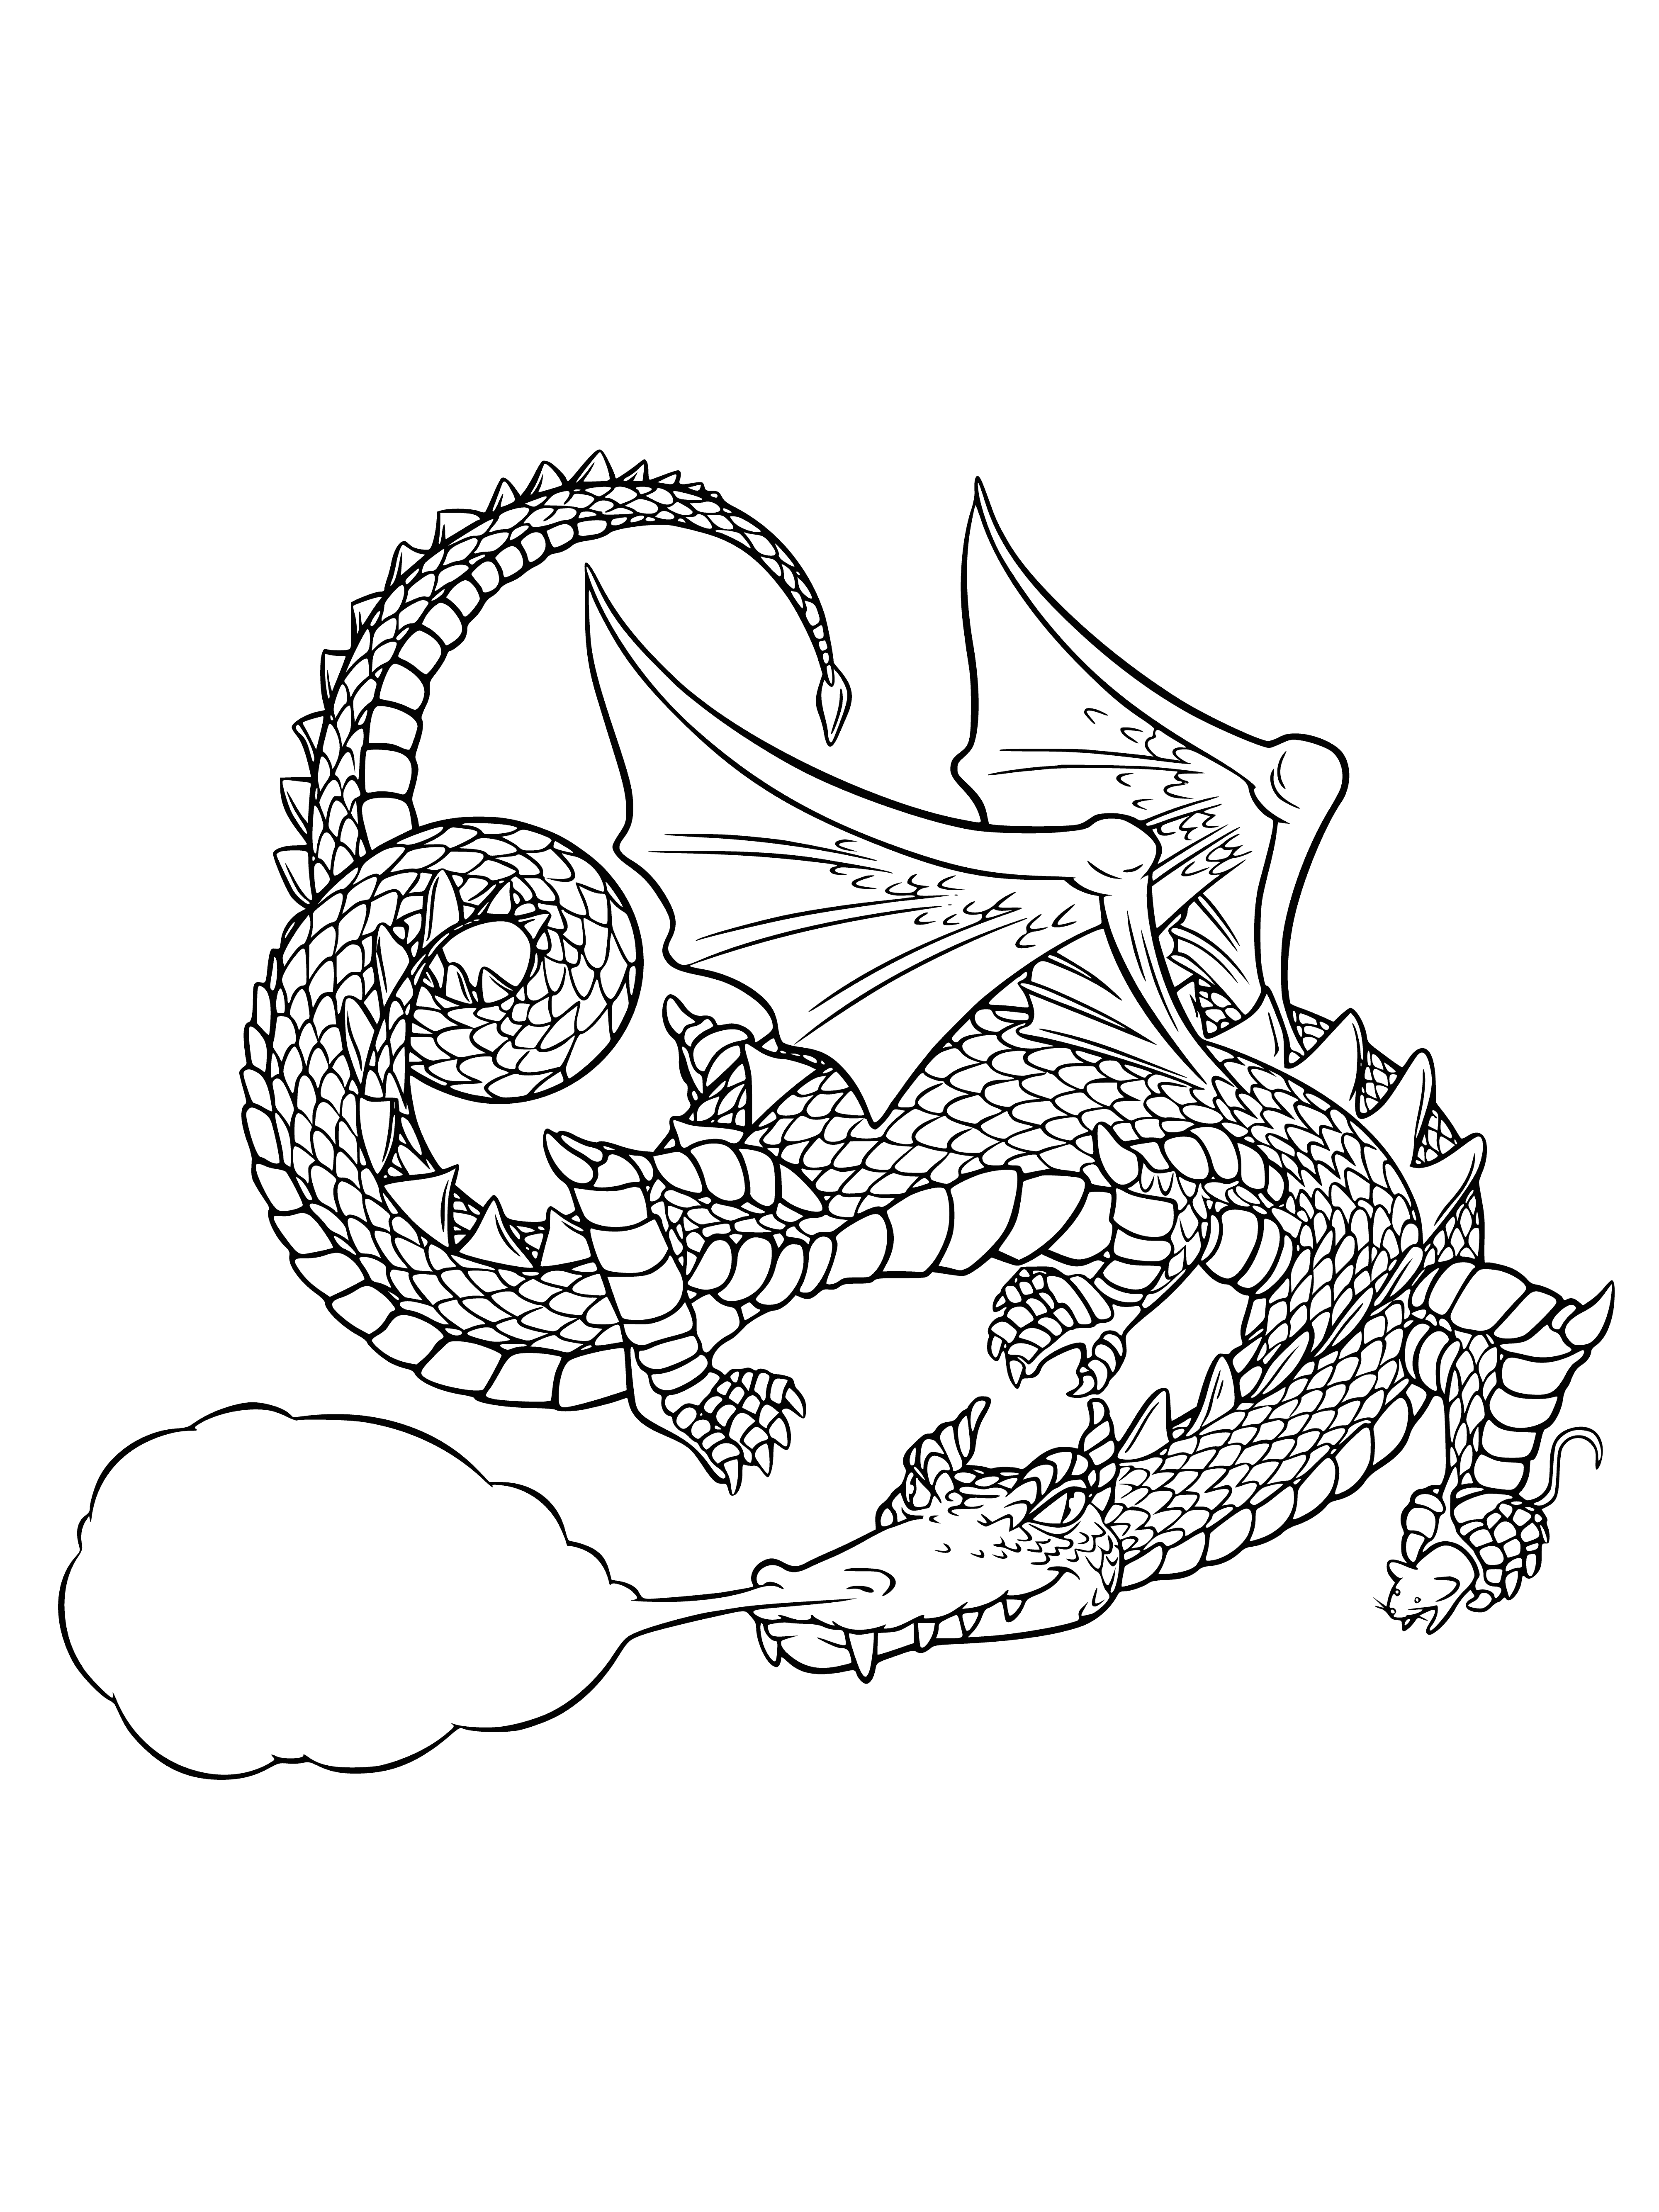 coloring page: Figurine of green dragon with long neck, open mouth & sharp teeth, wings spread & claws extended, standing on rock with curled tail.